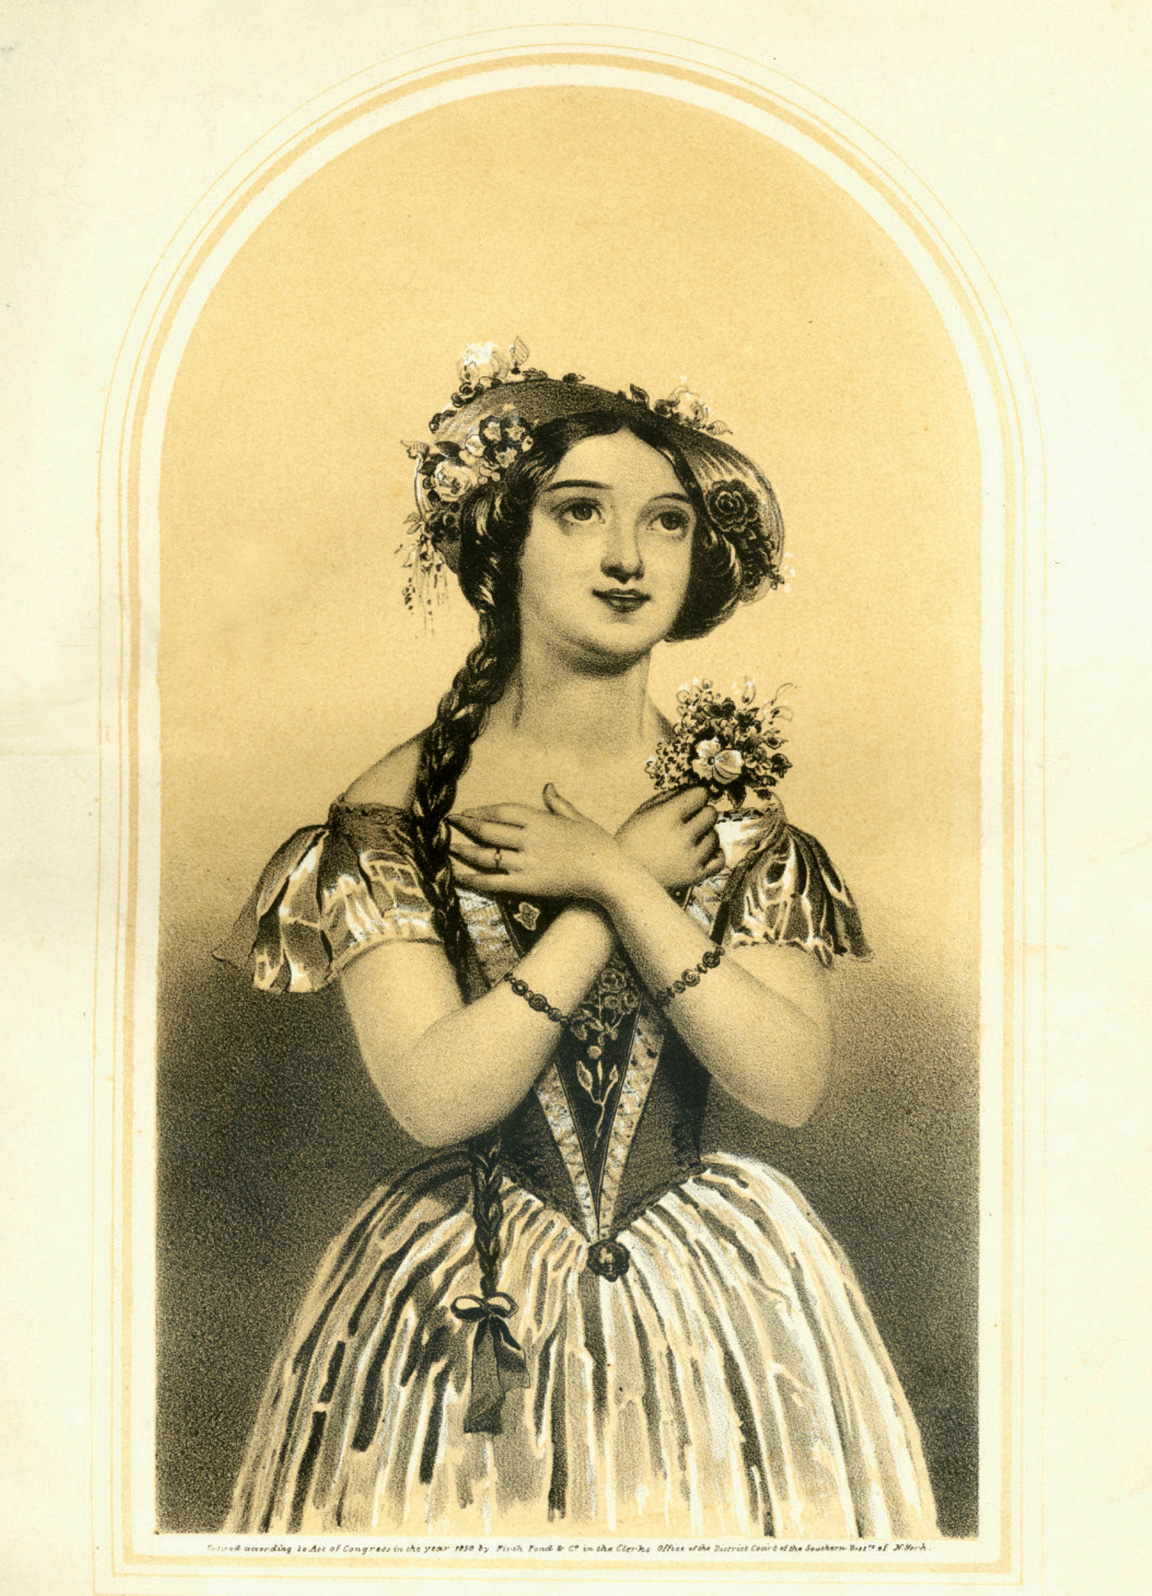 Jenny Lind as Amina (from the 1831 opera “La Sonnambula”). Frontispiece of Bellini’s “‘Do Not Mingle, One Human Feeling,’ As Sung By Madlle. Jenny Lind, at her Concerts in America.” Published by S. C. Jollie and Firth, Pond and Co. Milwaukee Public Library Sheet Music Collection.